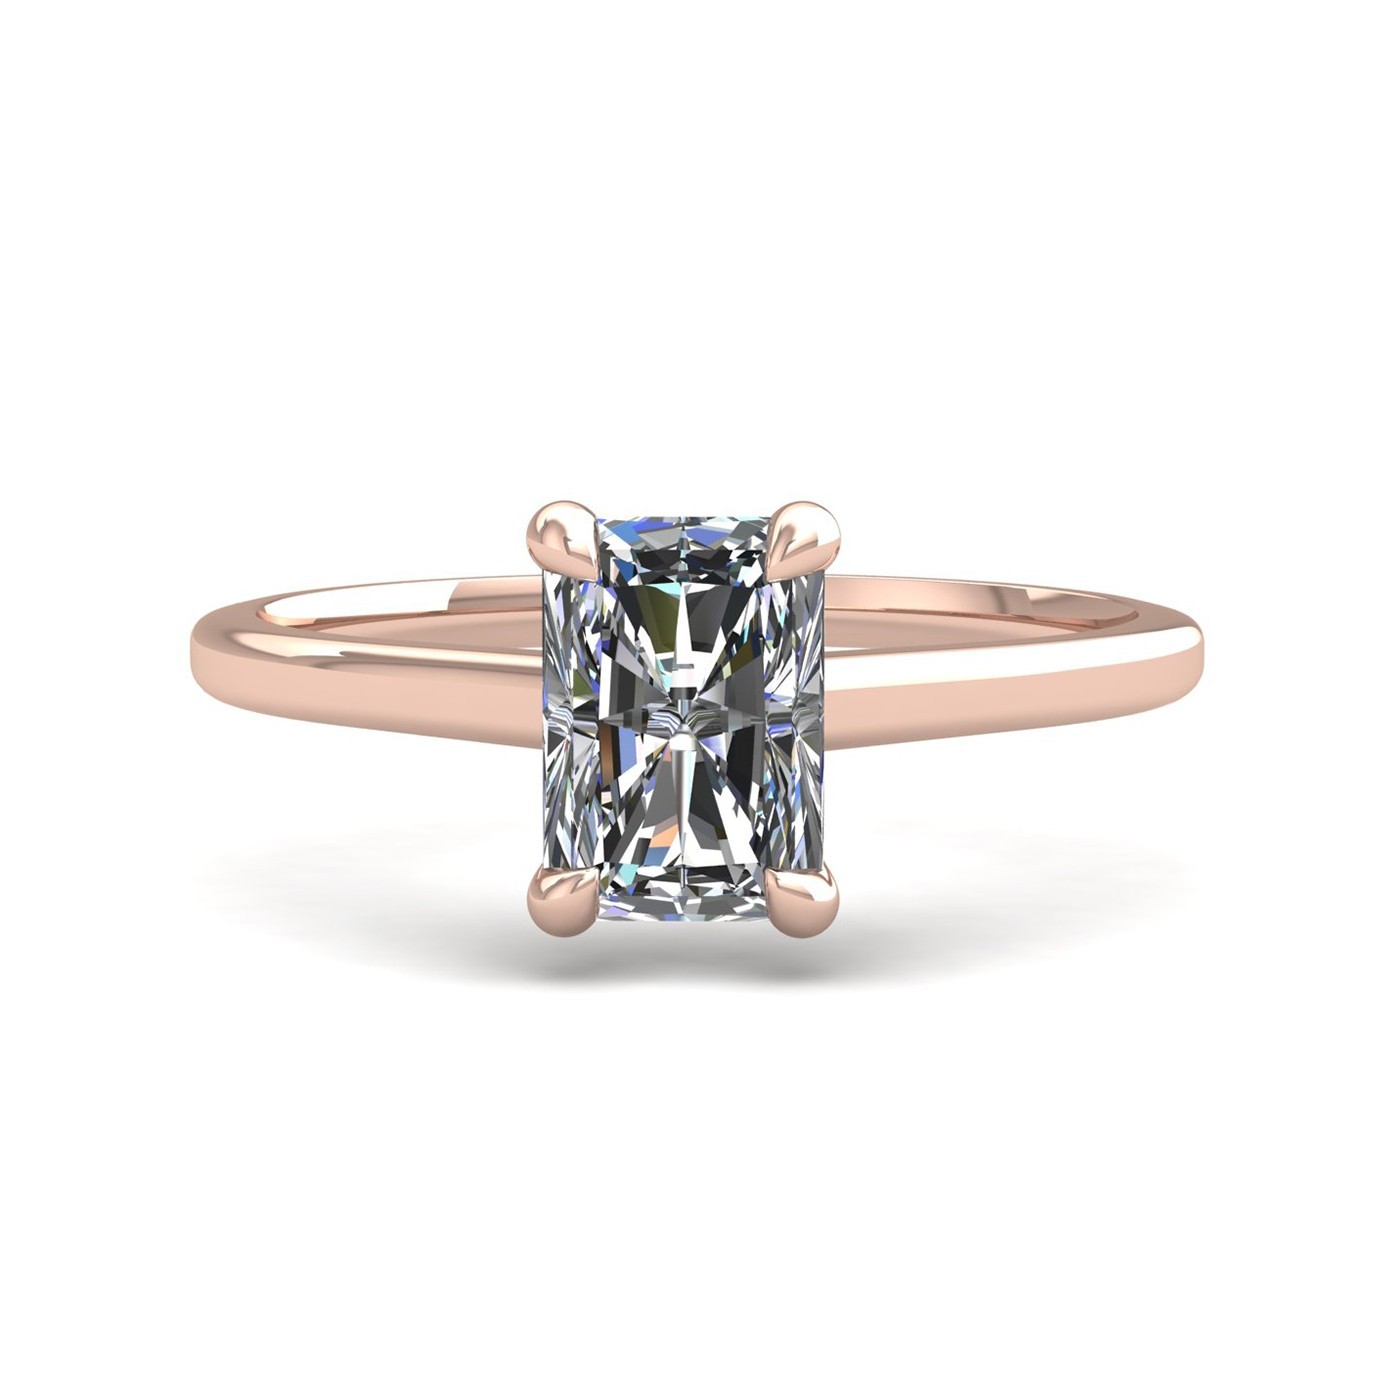 18k rose gold  0,80 ct 4 prongs solitaire radiant cut diamond engagement ring with whisper thin band Photos & images